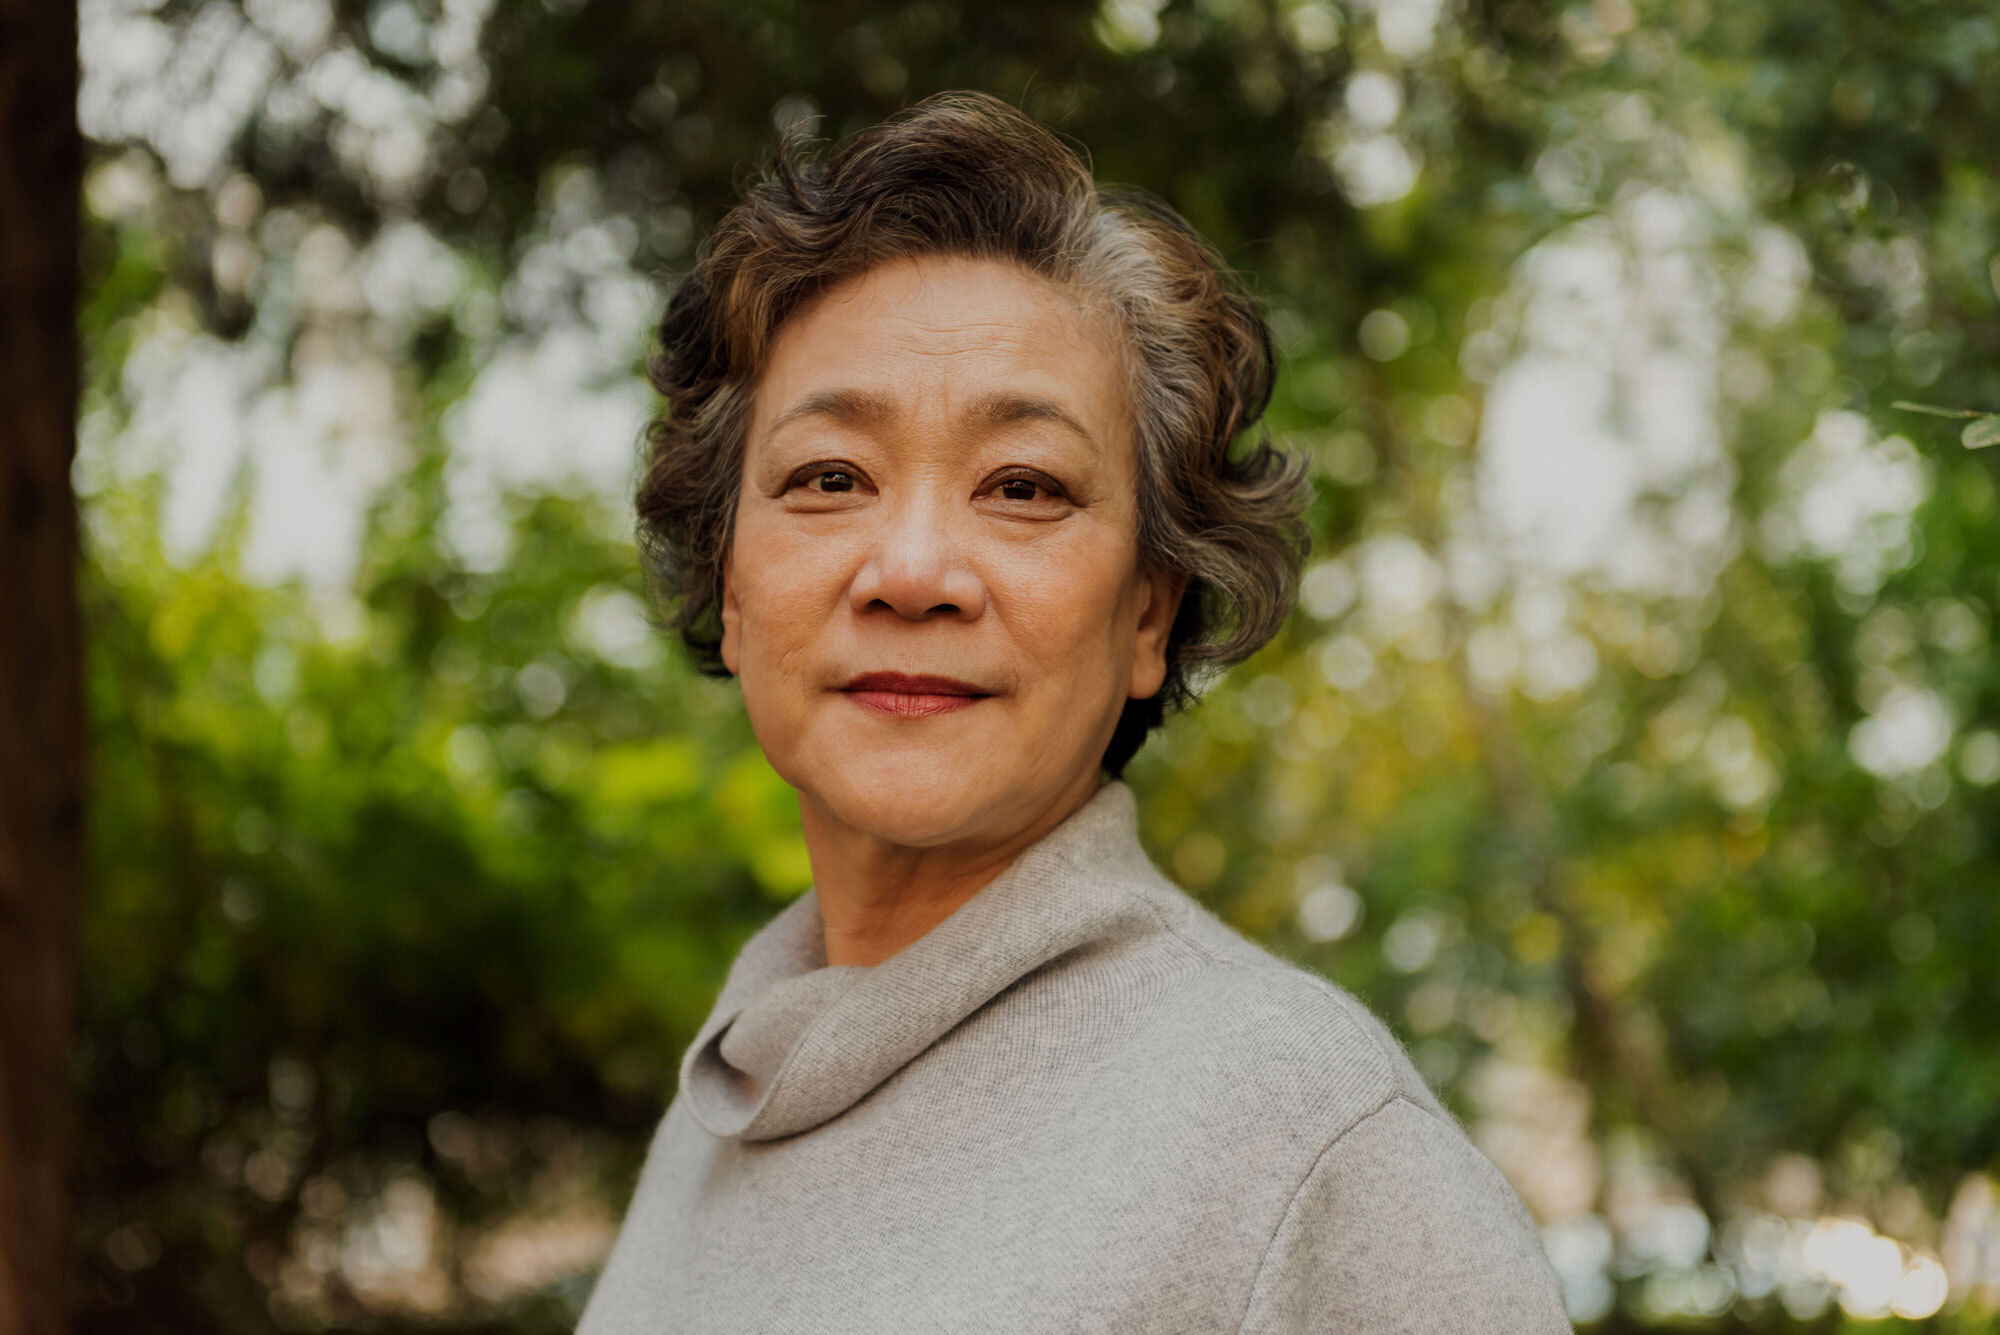 An older asian woman in a gray sweater standing in front of blurred out trees.